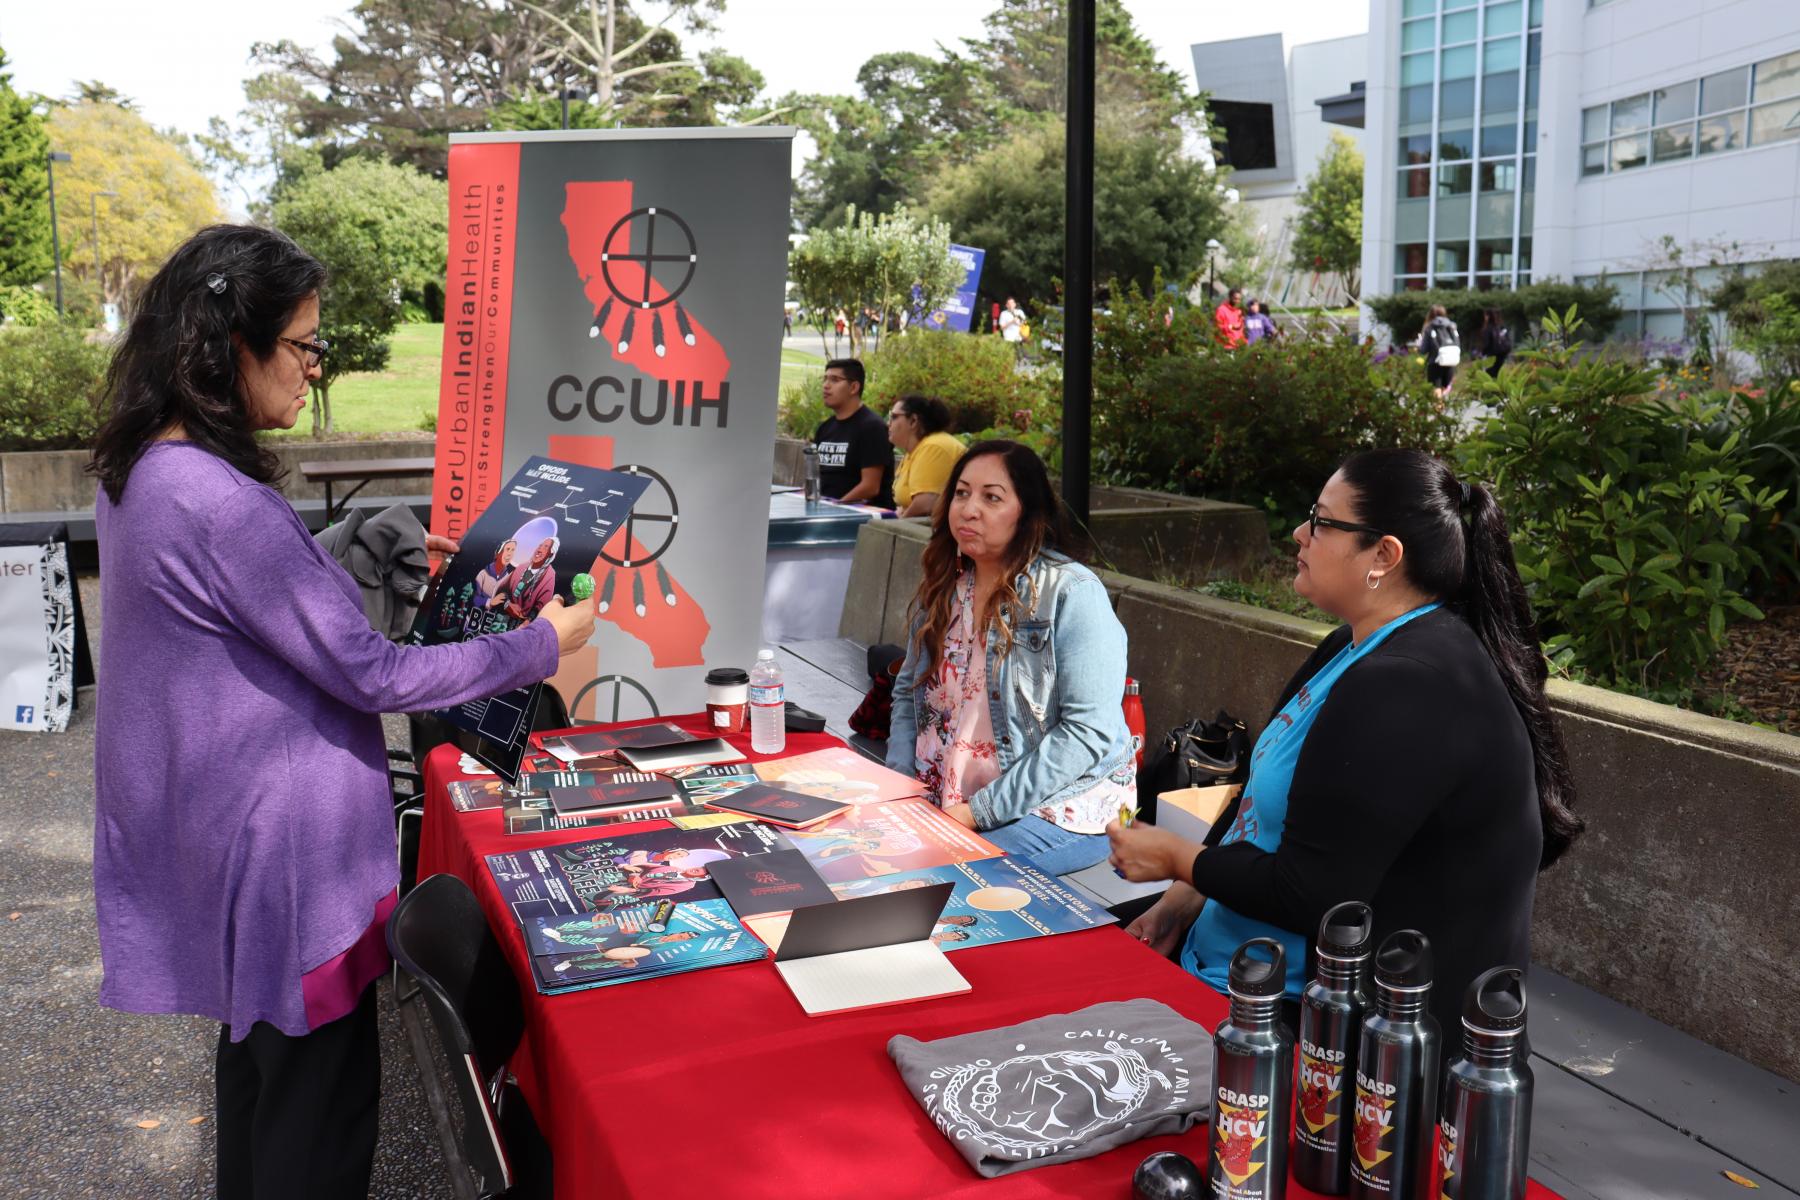 Catriona Esquibel, April McGill, and Jackie Pierson at Community Organizing Fair, September 10, 2019